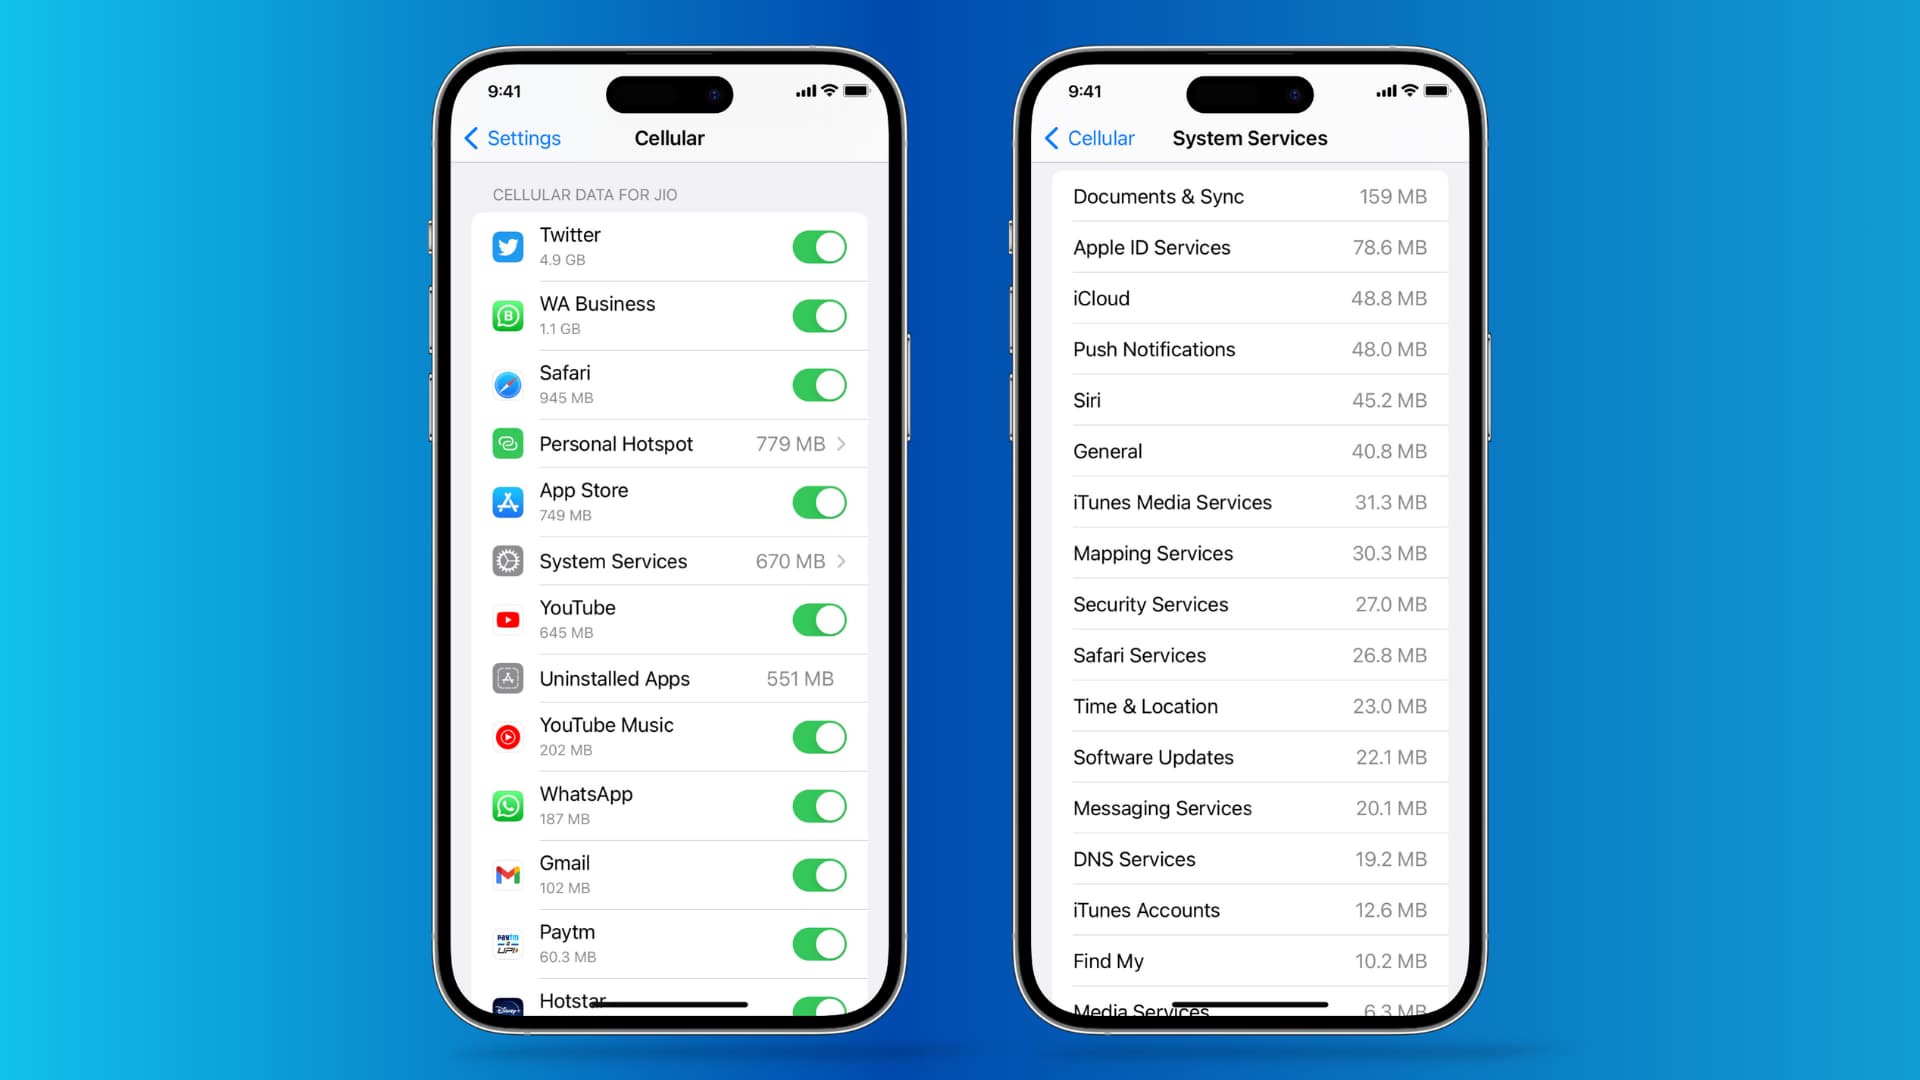 Cellular data used by each app and system service on iPhone